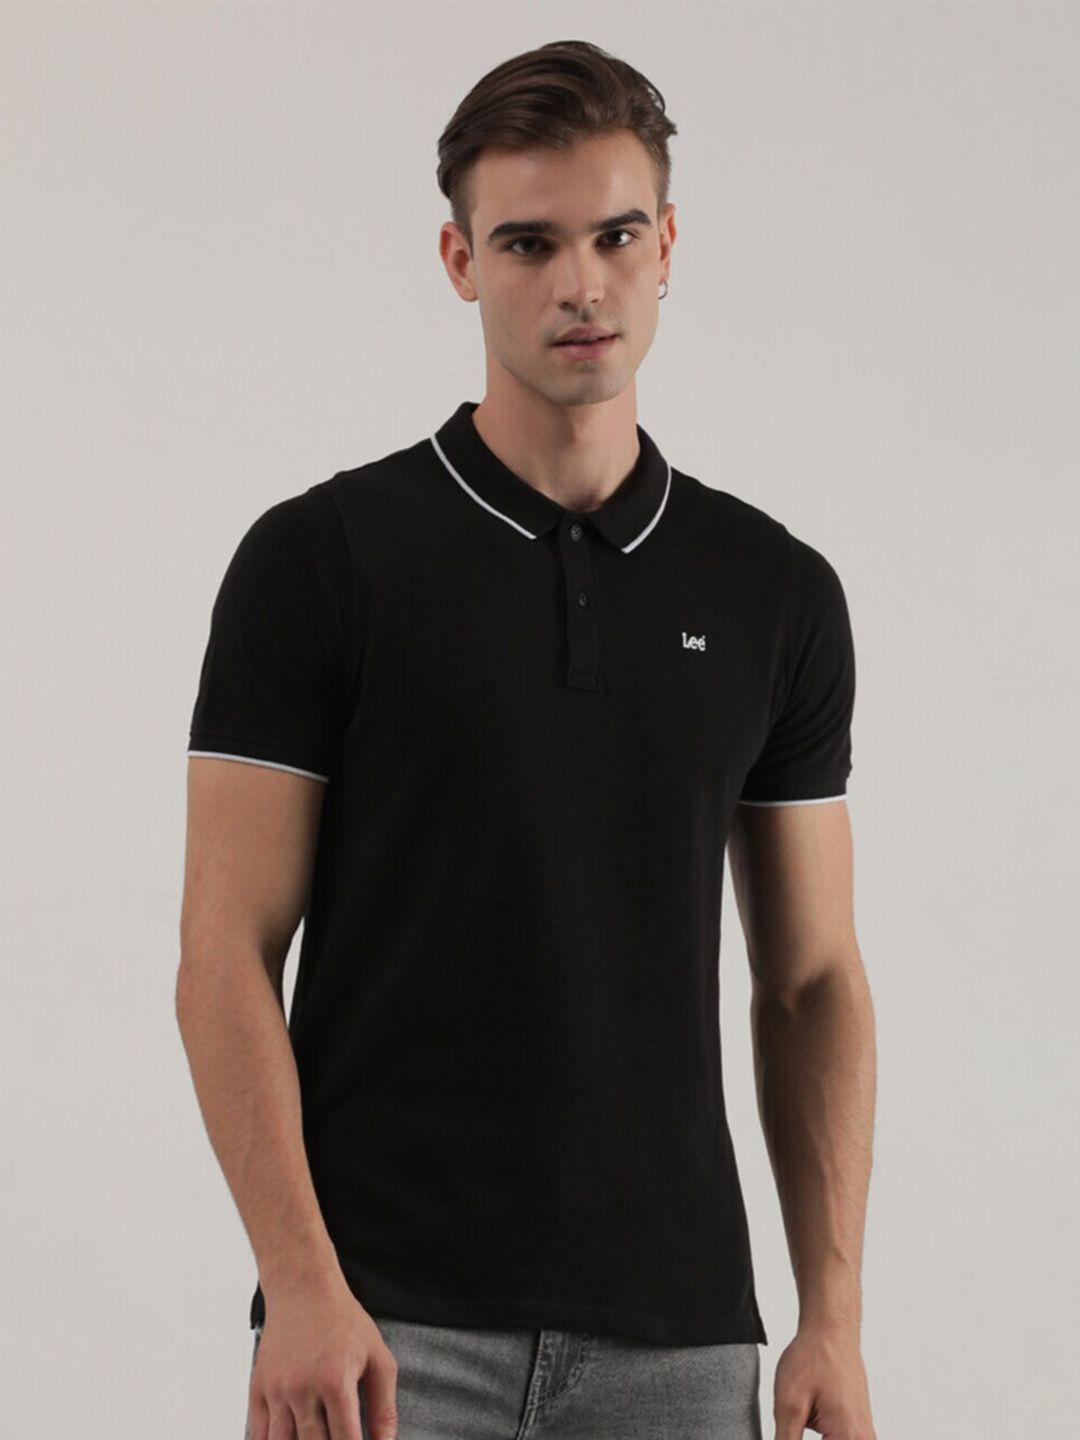 lee polo collar cotton slim fit t-shirt